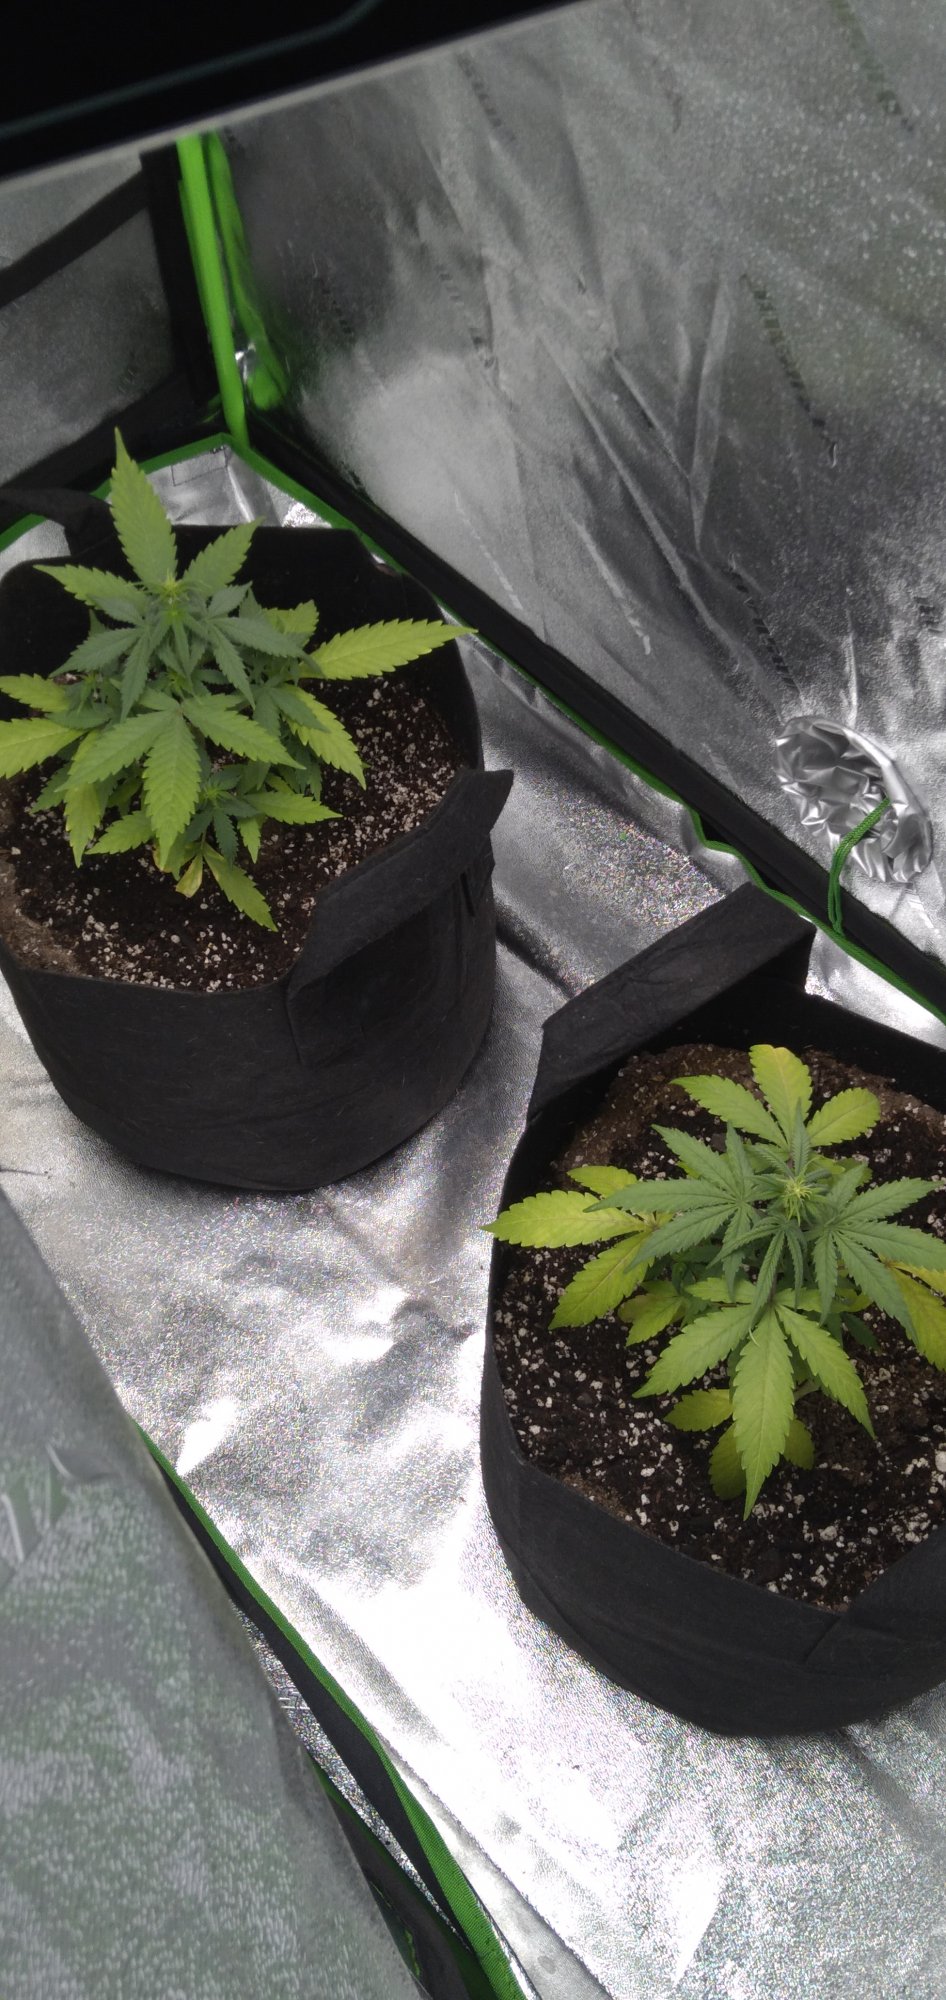 1st time grower yellowing plants early flower